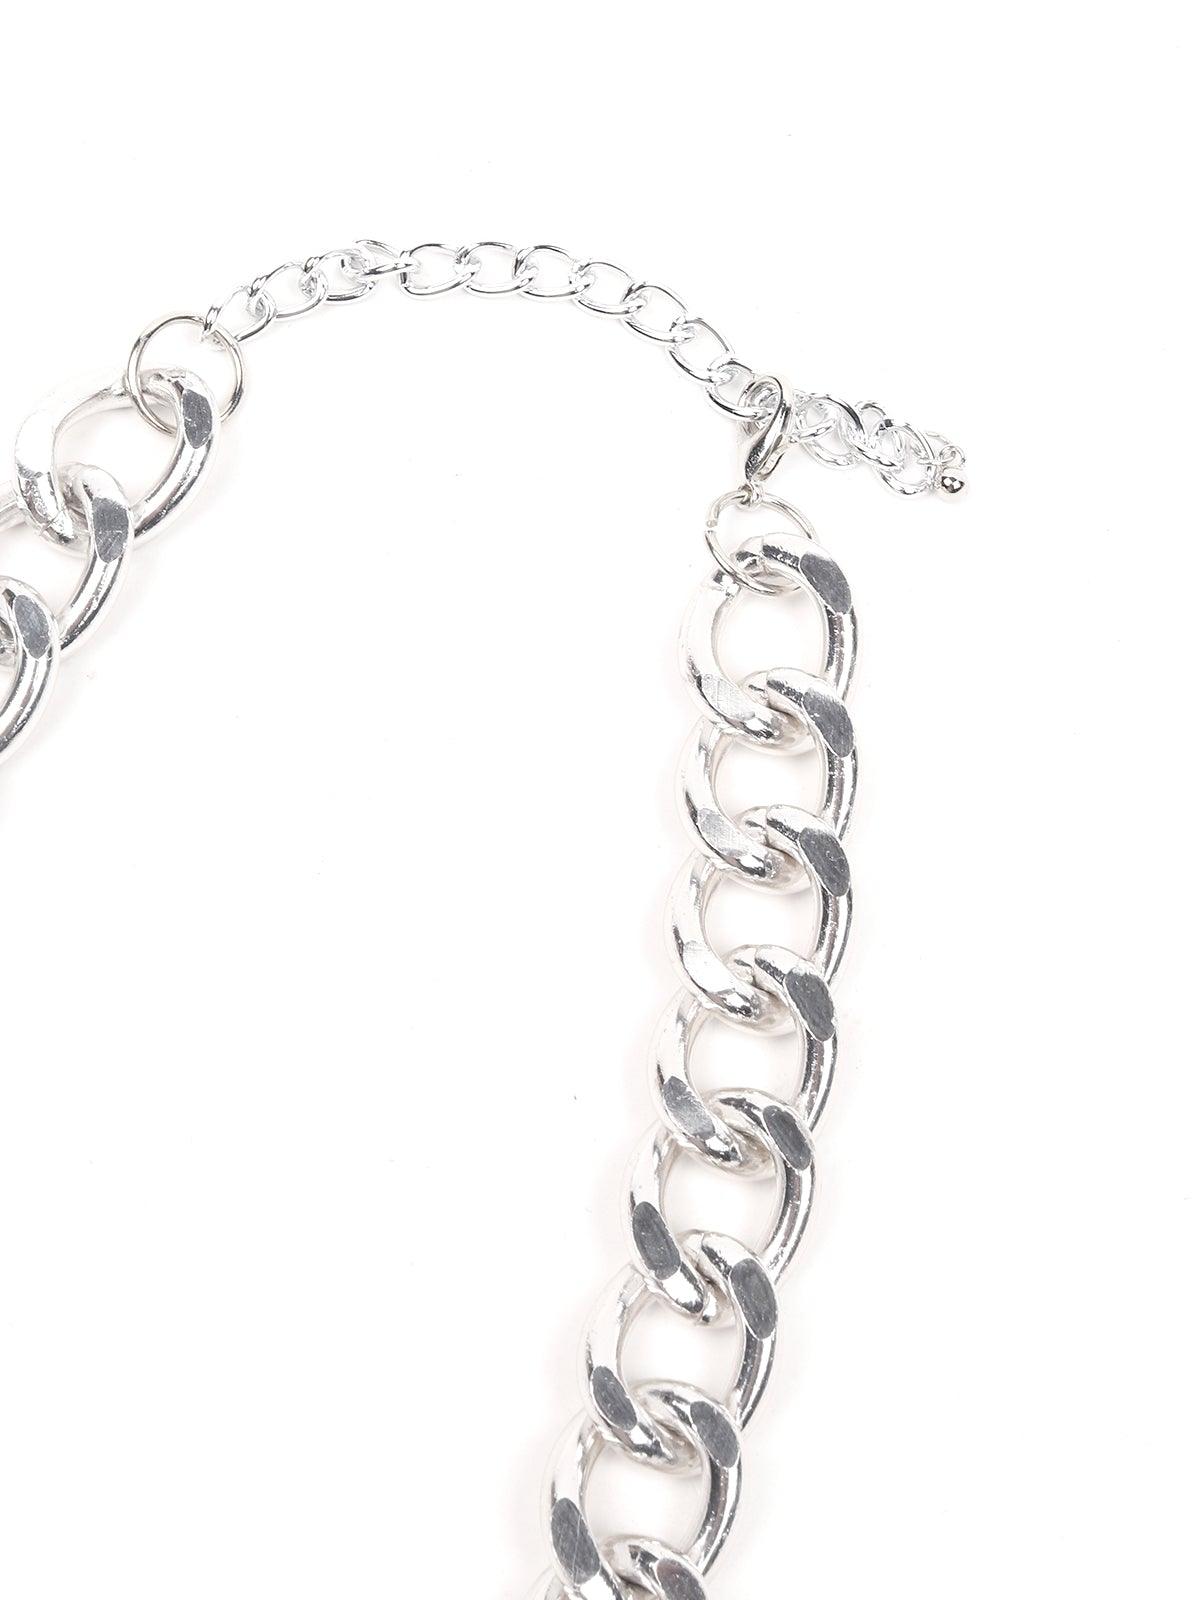 Women's Stunning Interlinked Silver Chain With White Stones Embedded. - Odette